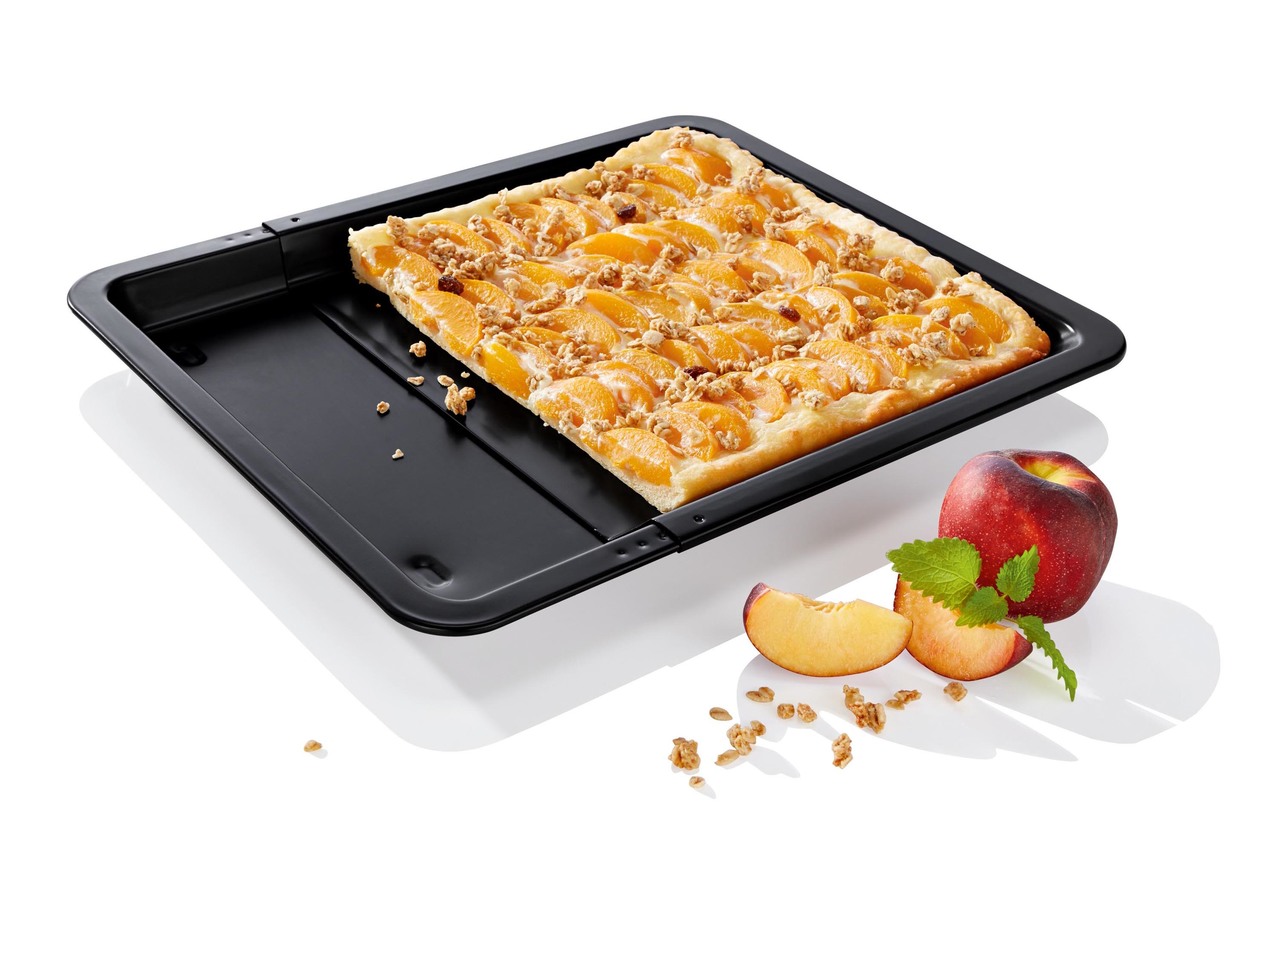 Extendable All-Purpose Baking Tray